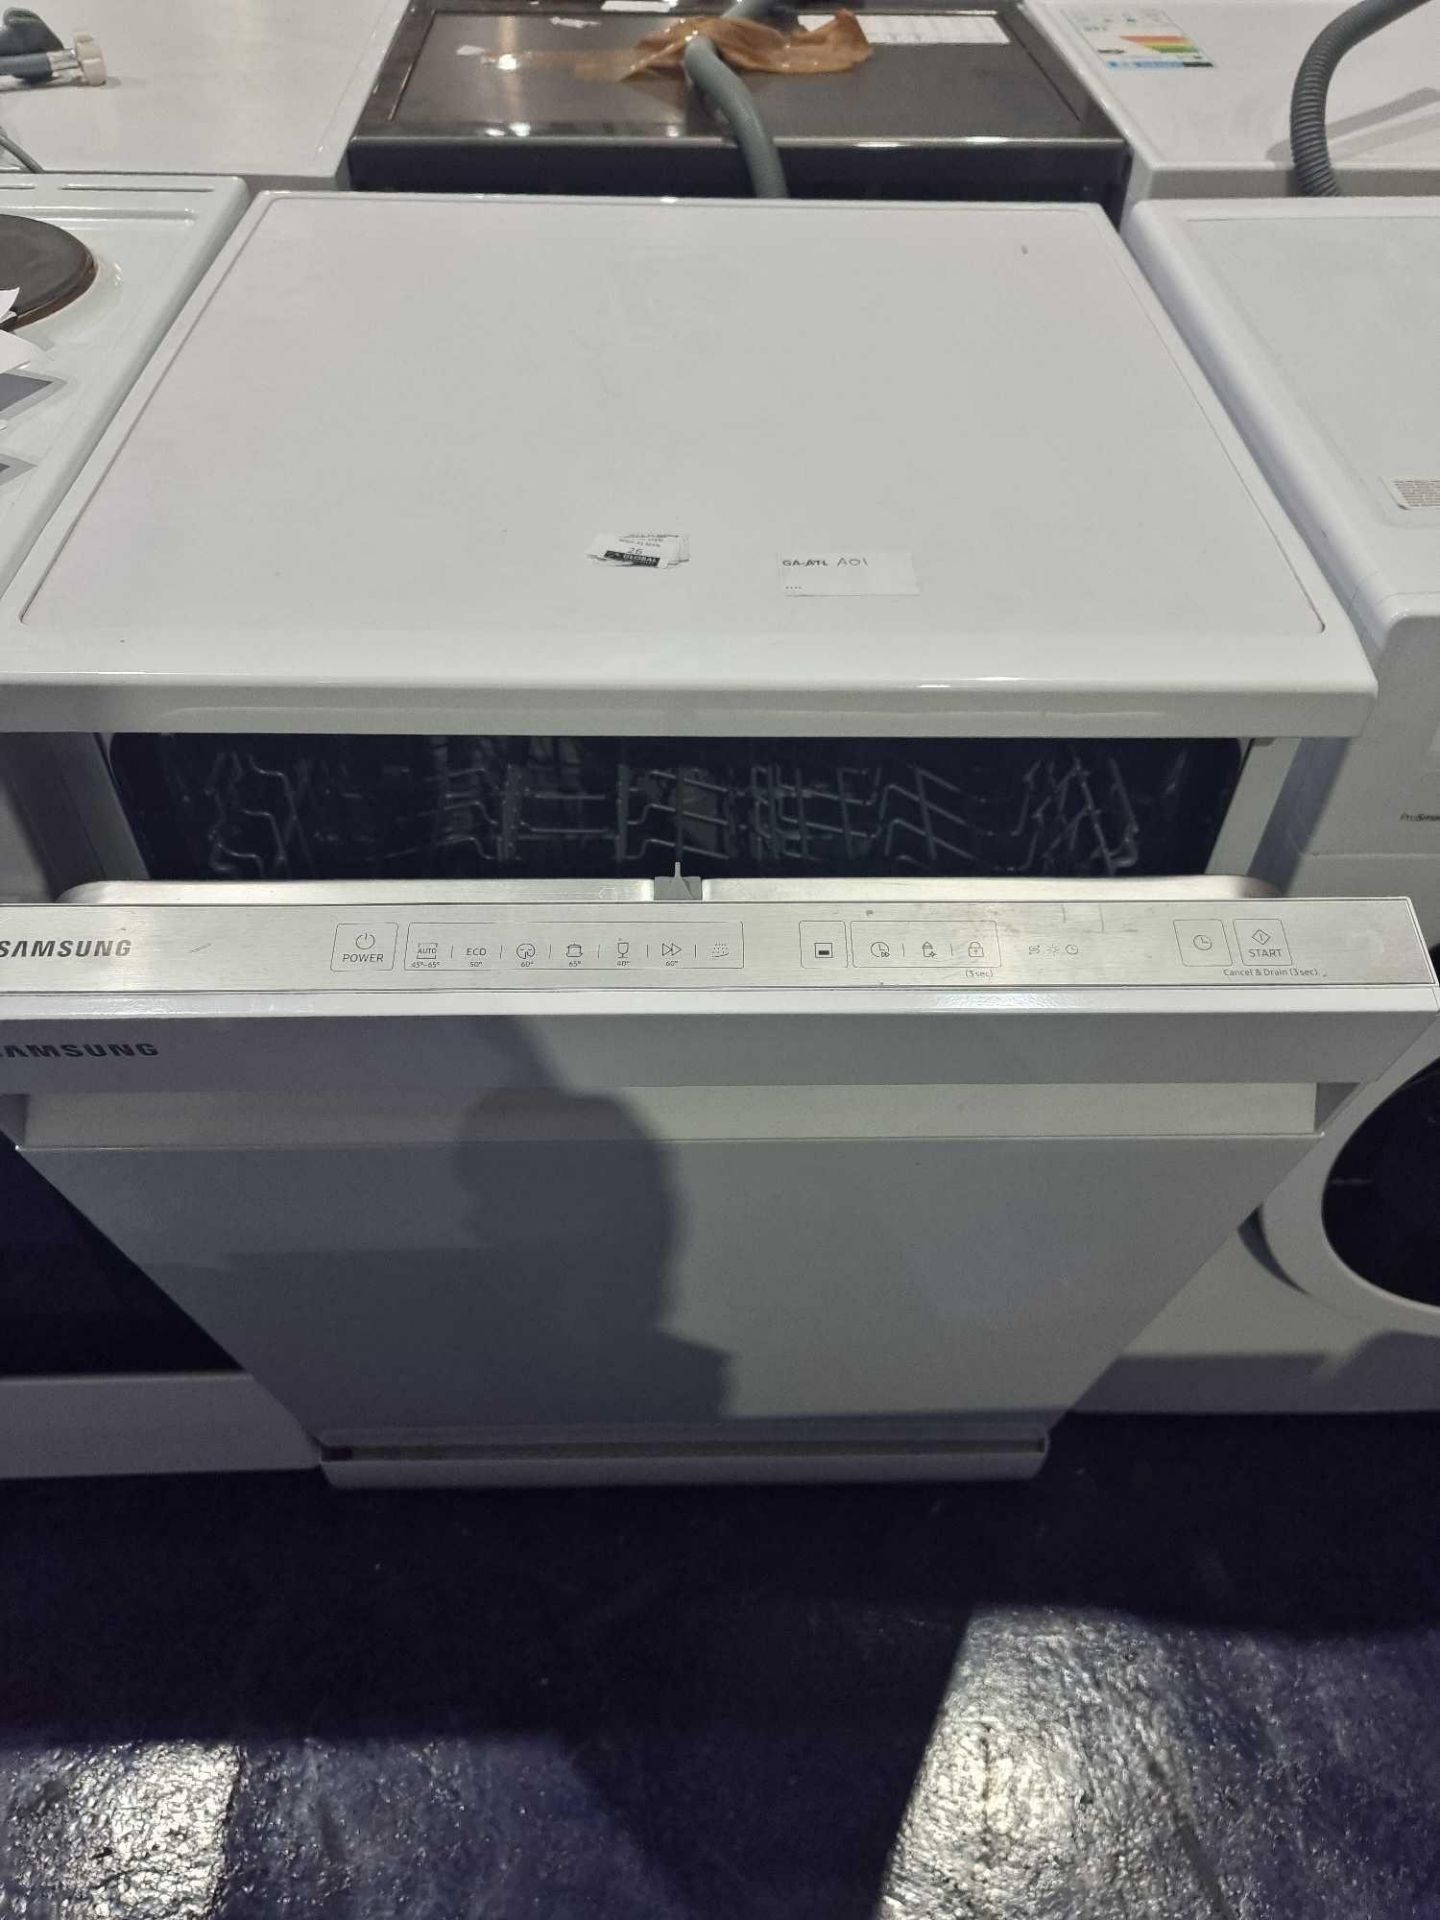 (Kw) RRP £600, Lot To Contain X1 Samsung Dishwasher, Unboxed - Image 3 of 4